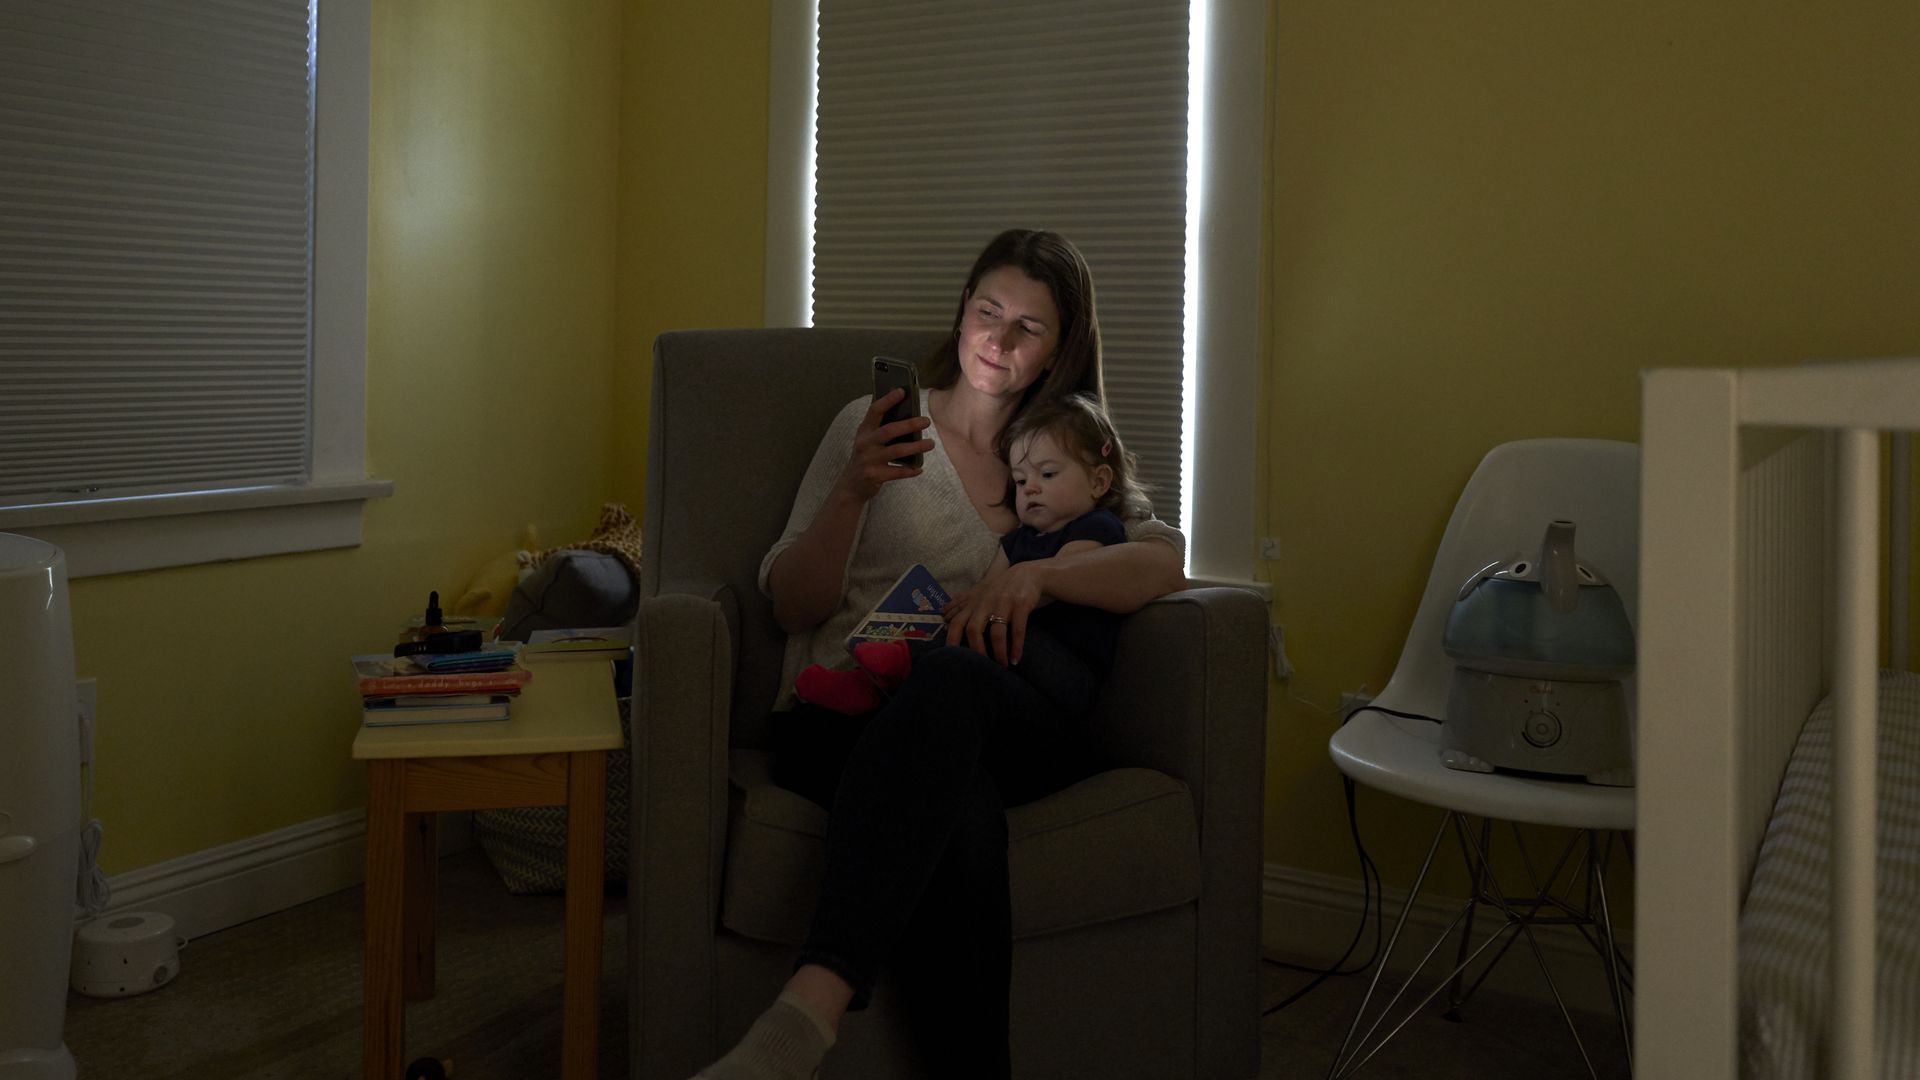 In this image, a mother looks at her phone while holding her infant in her lap in a chair in the corner of a nursery.